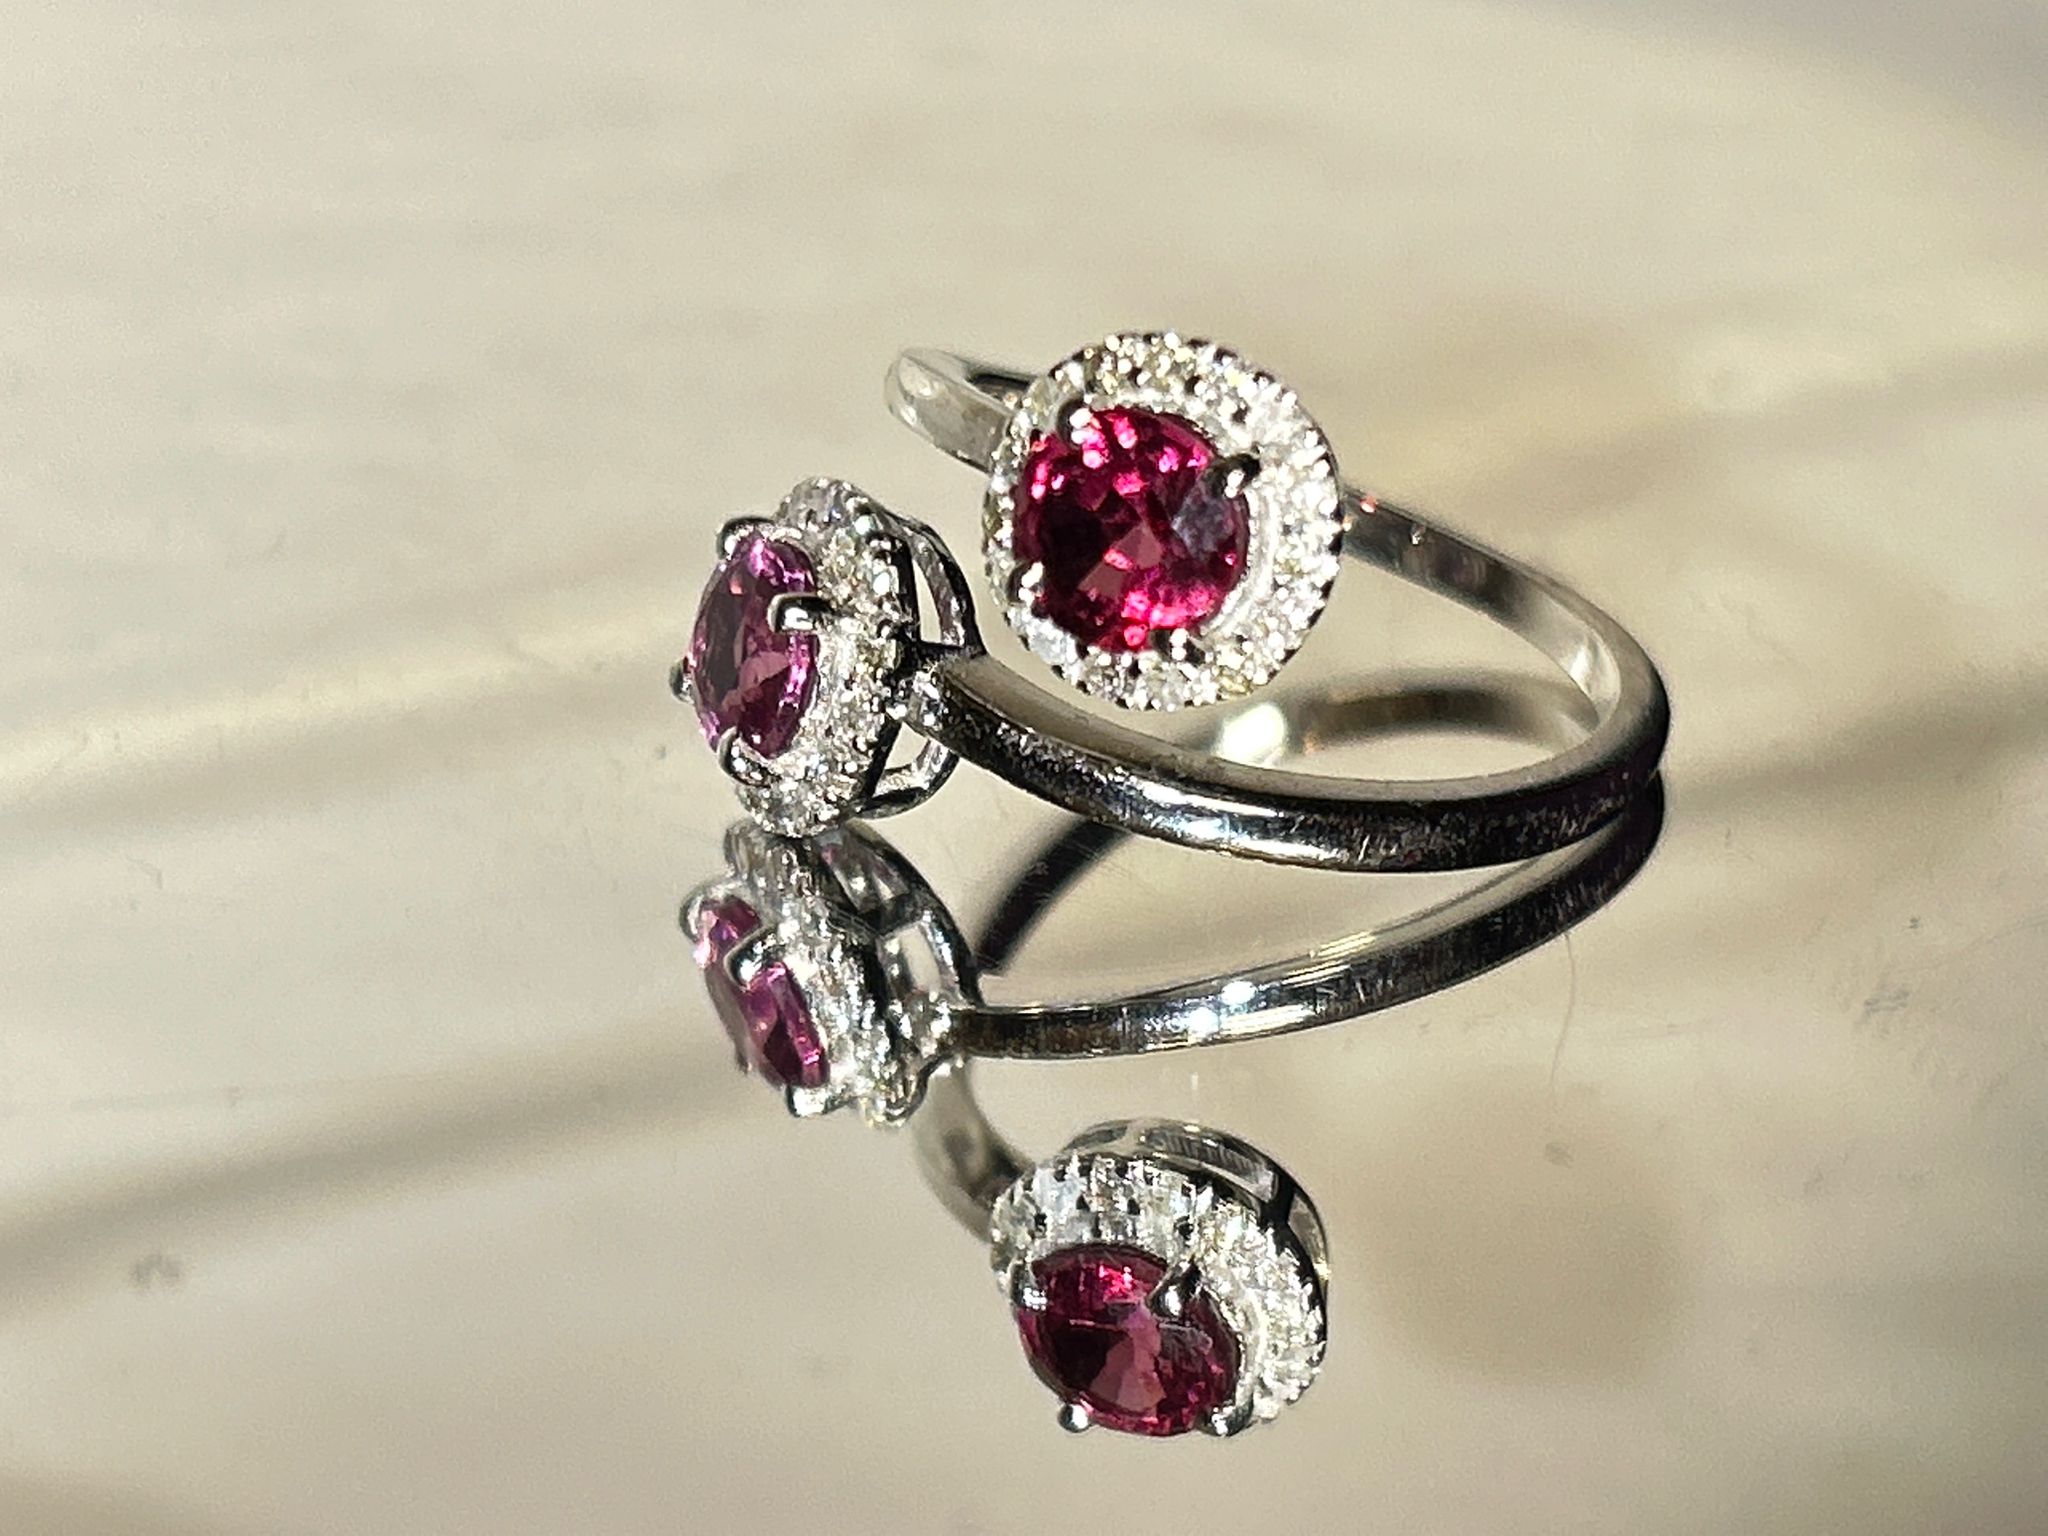 Beautiful Natural Spinel Ring With Diamonds and 18k Gold - Image 5 of 8